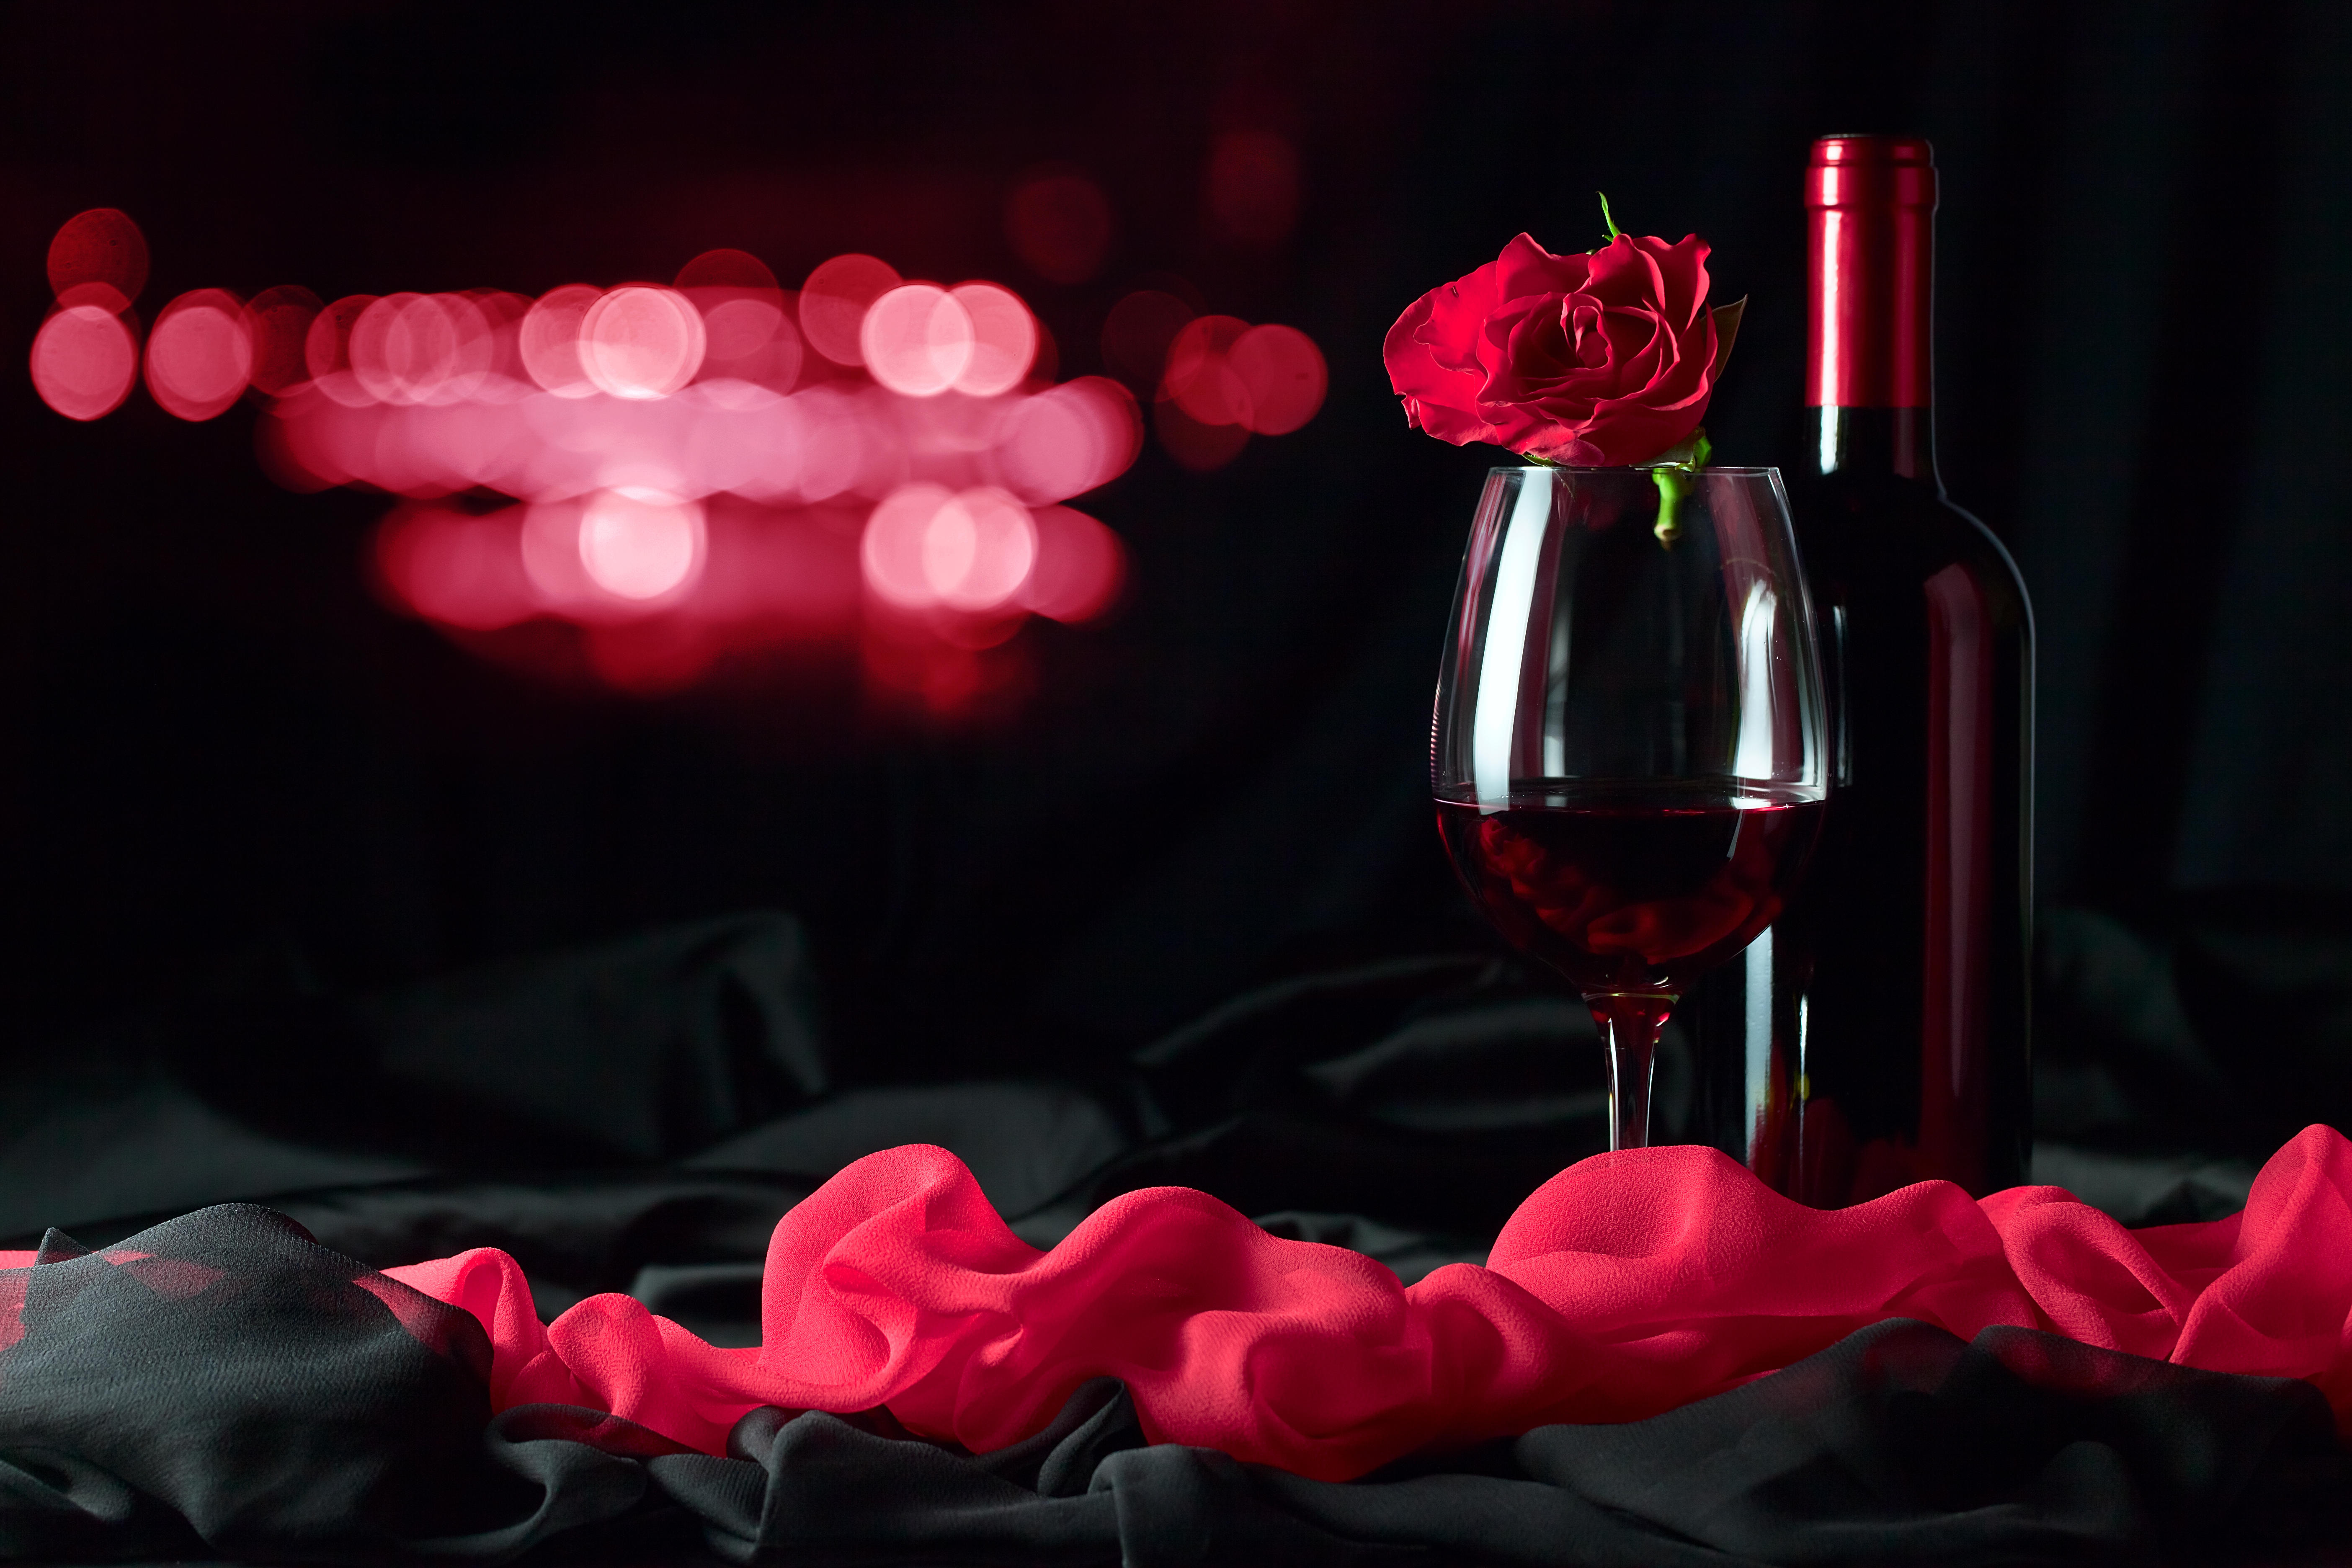 Wallpapers Wineglasses Romance Valentine s Day on the desktop